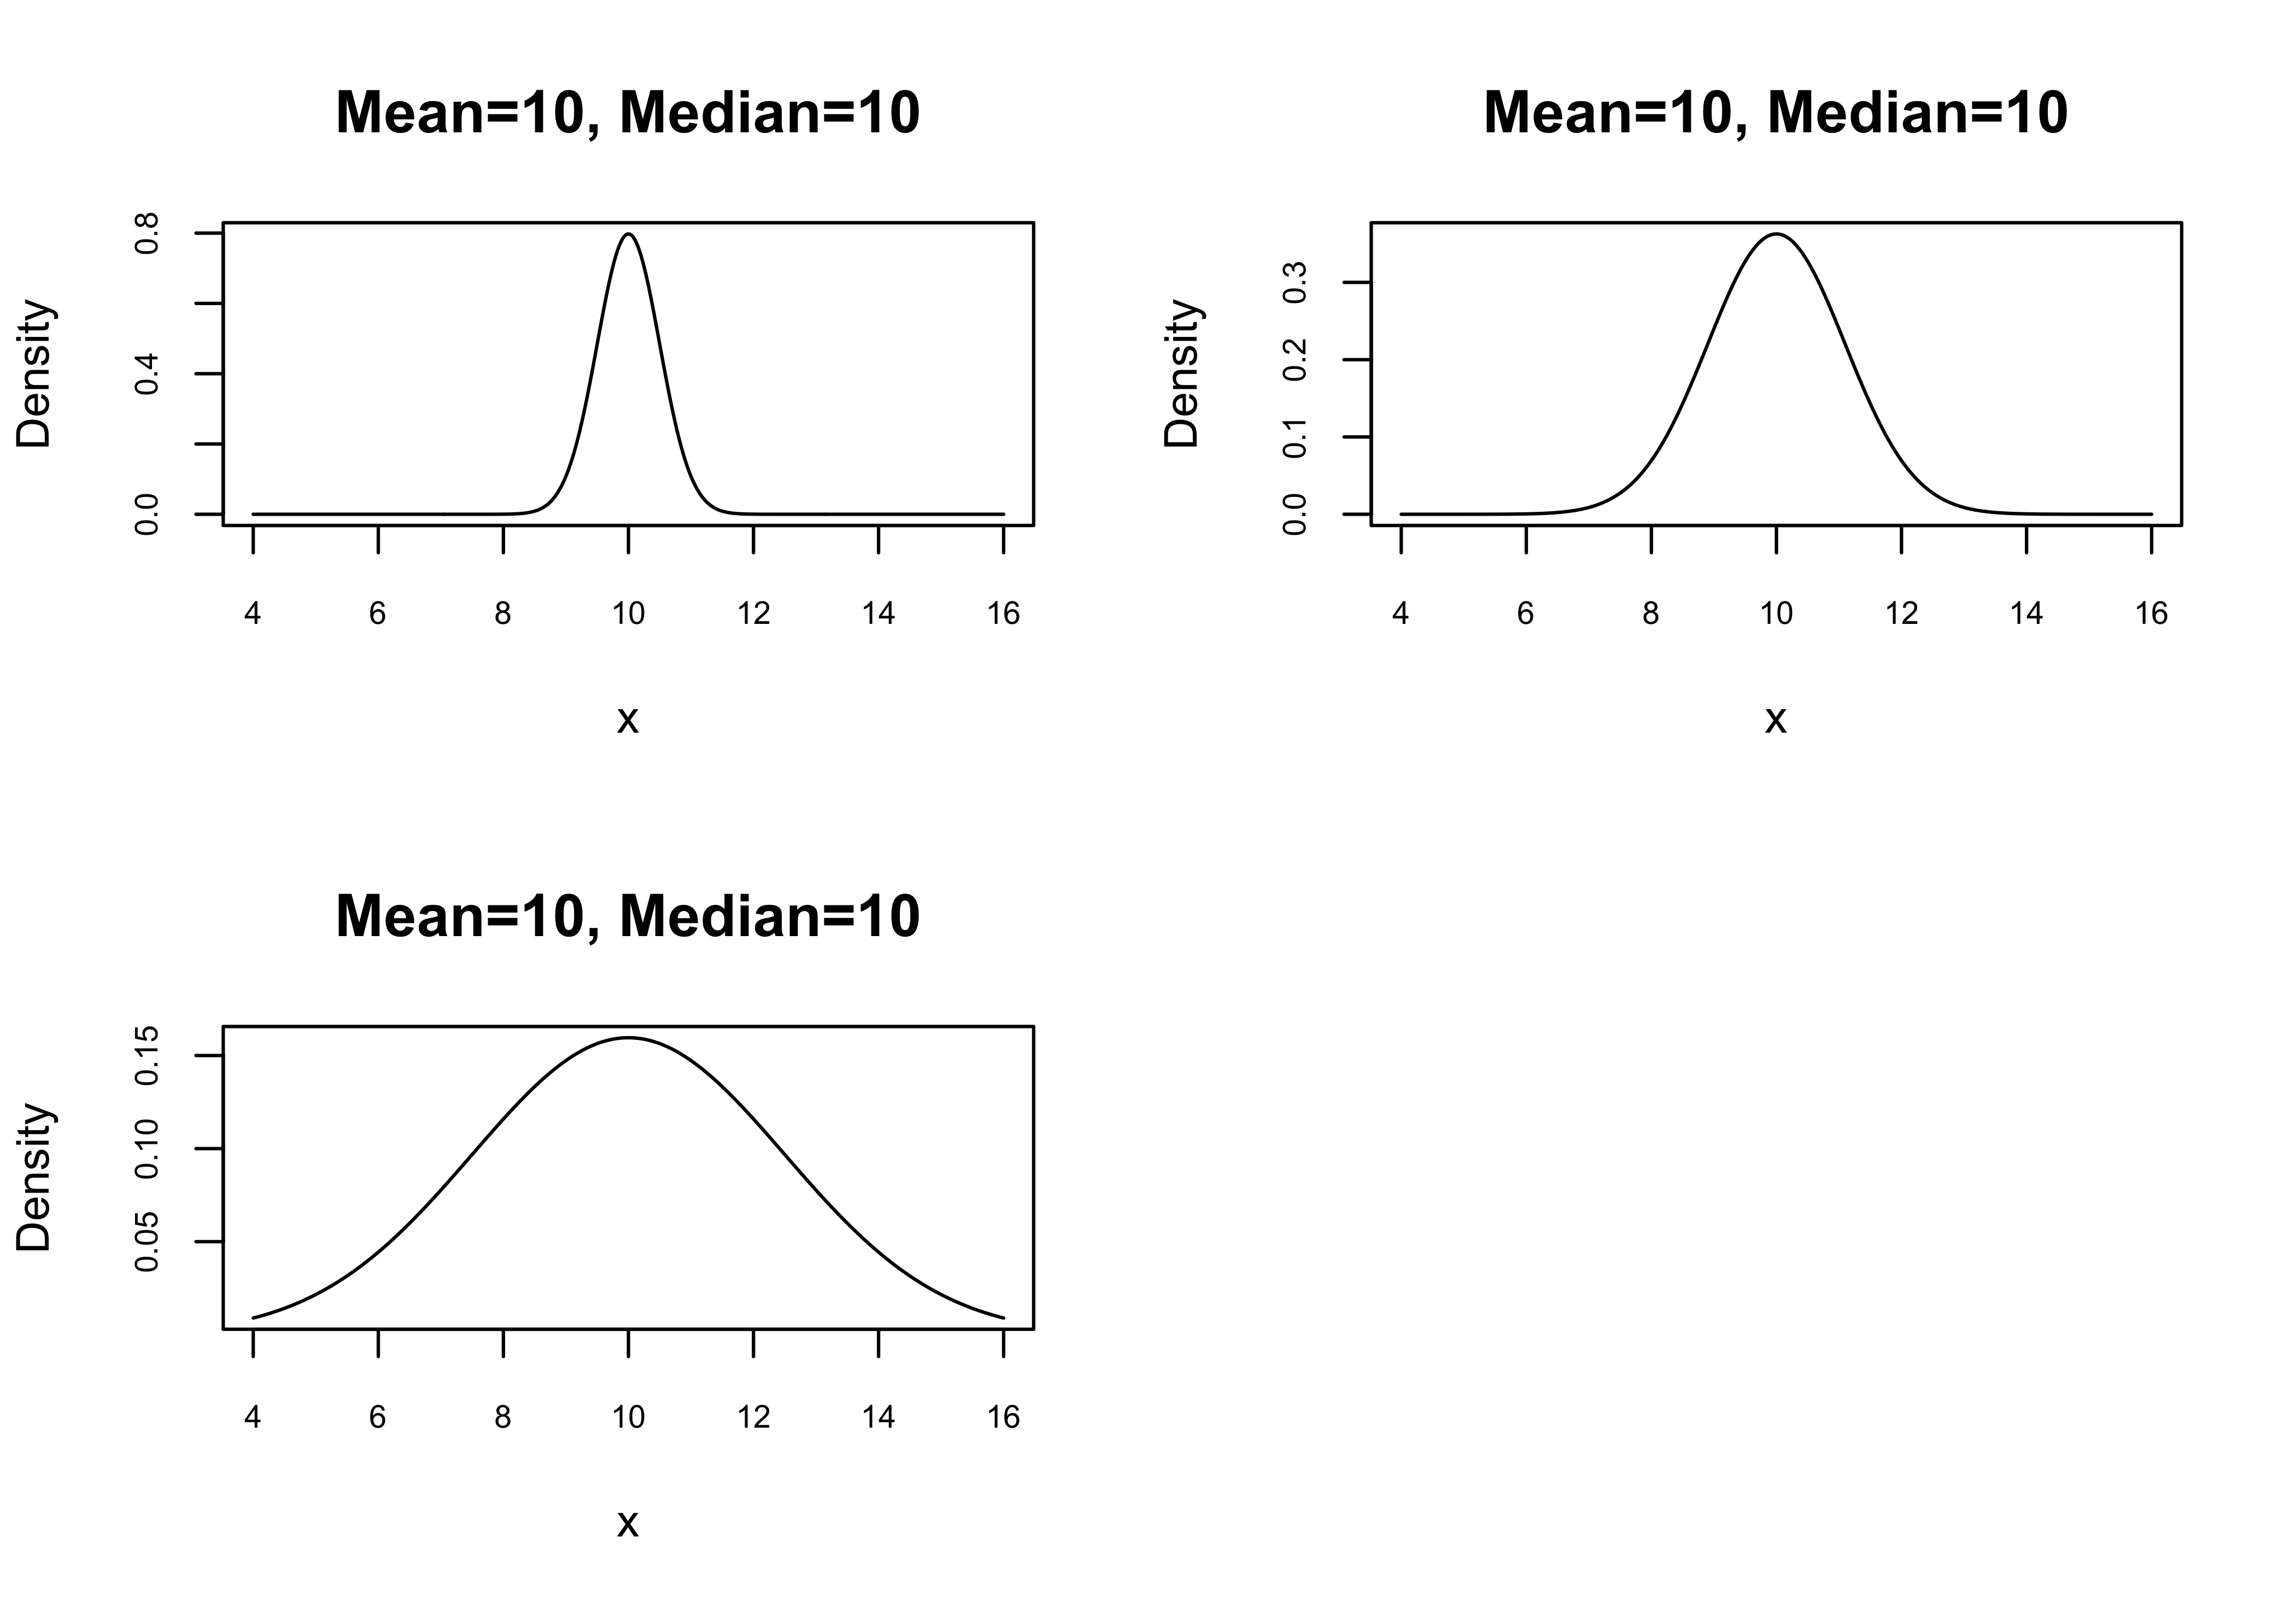 Distributions with Identical Central Tendencies but Different Levels of Dispersion